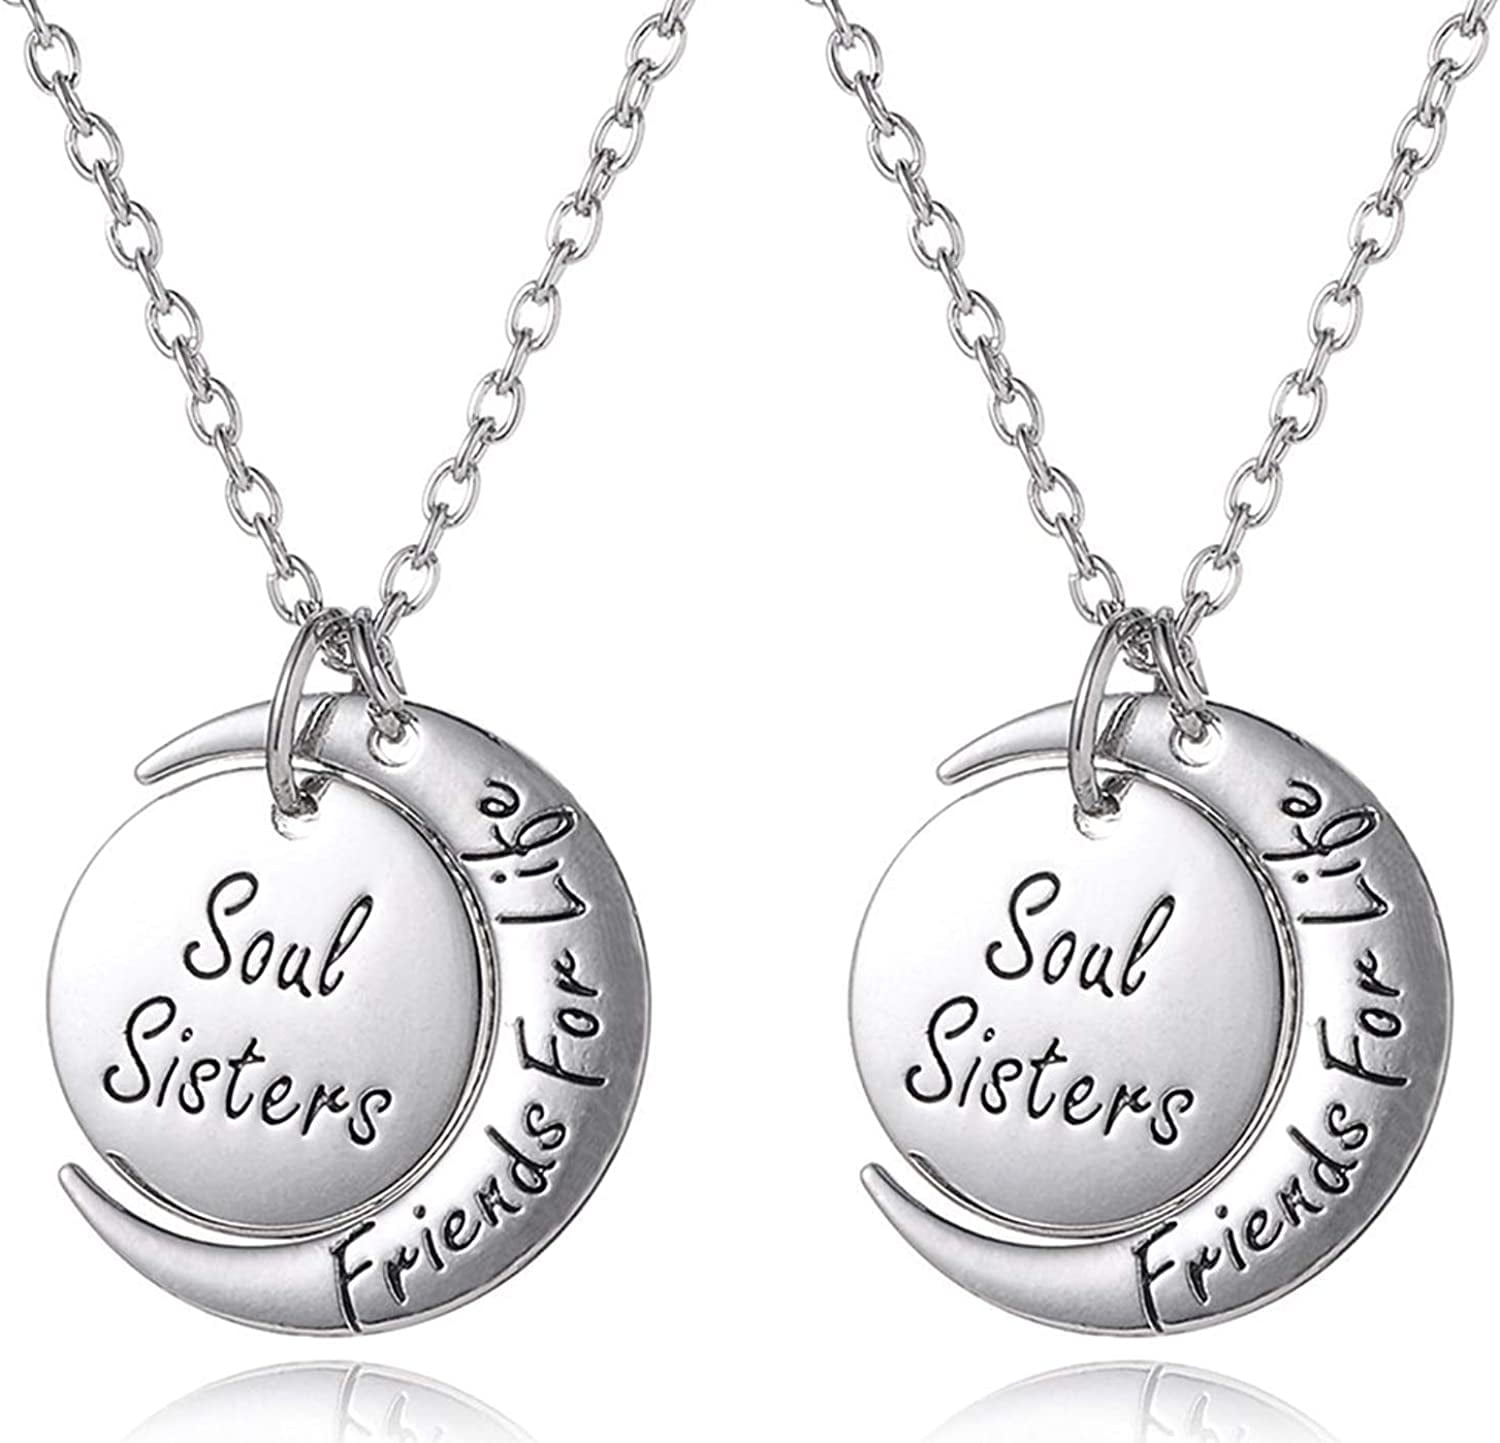 Womens Gifts | Gift Ideas for Her | Personalised Necklace | Design Your Own Necklace | Soul Sister | Sisters of The Soul | Friends Gift